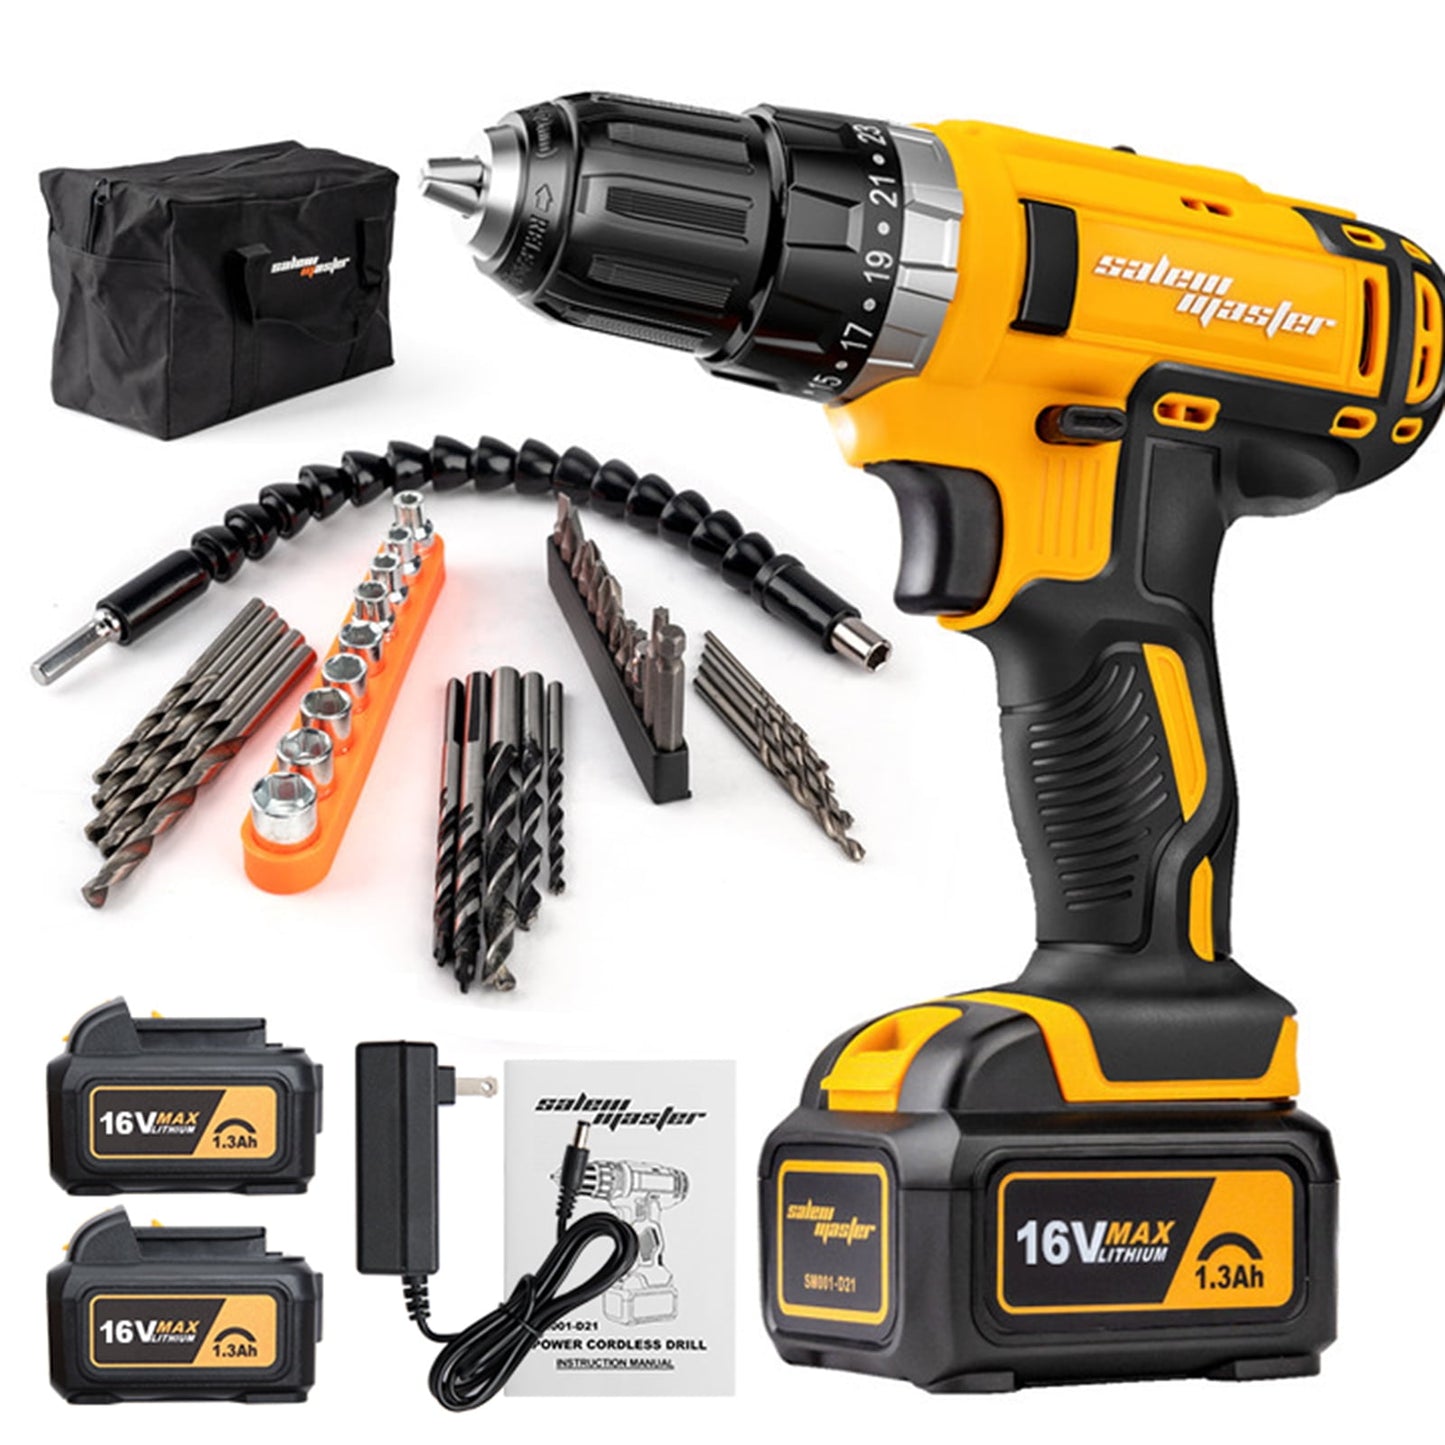 SALEM MASTER Electric Drill Driver 16V Max 3/8'' Cordless Drill for Home Improvement & DIY Projects(2 Batteries)